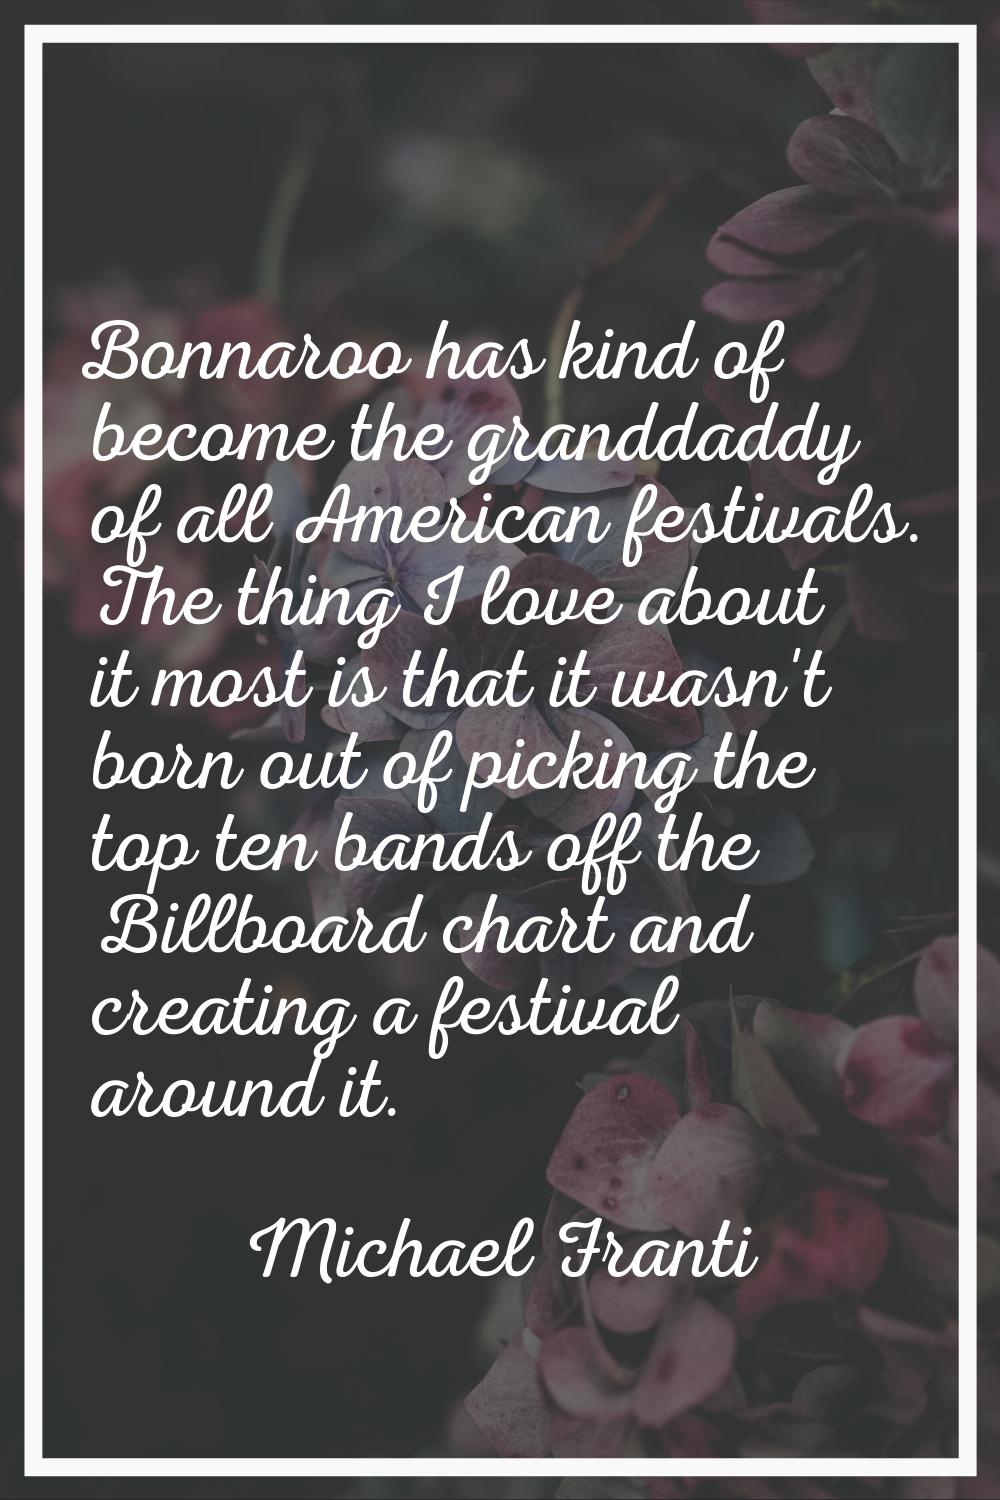 Bonnaroo has kind of become the granddaddy of all American festivals. The thing I love about it mos